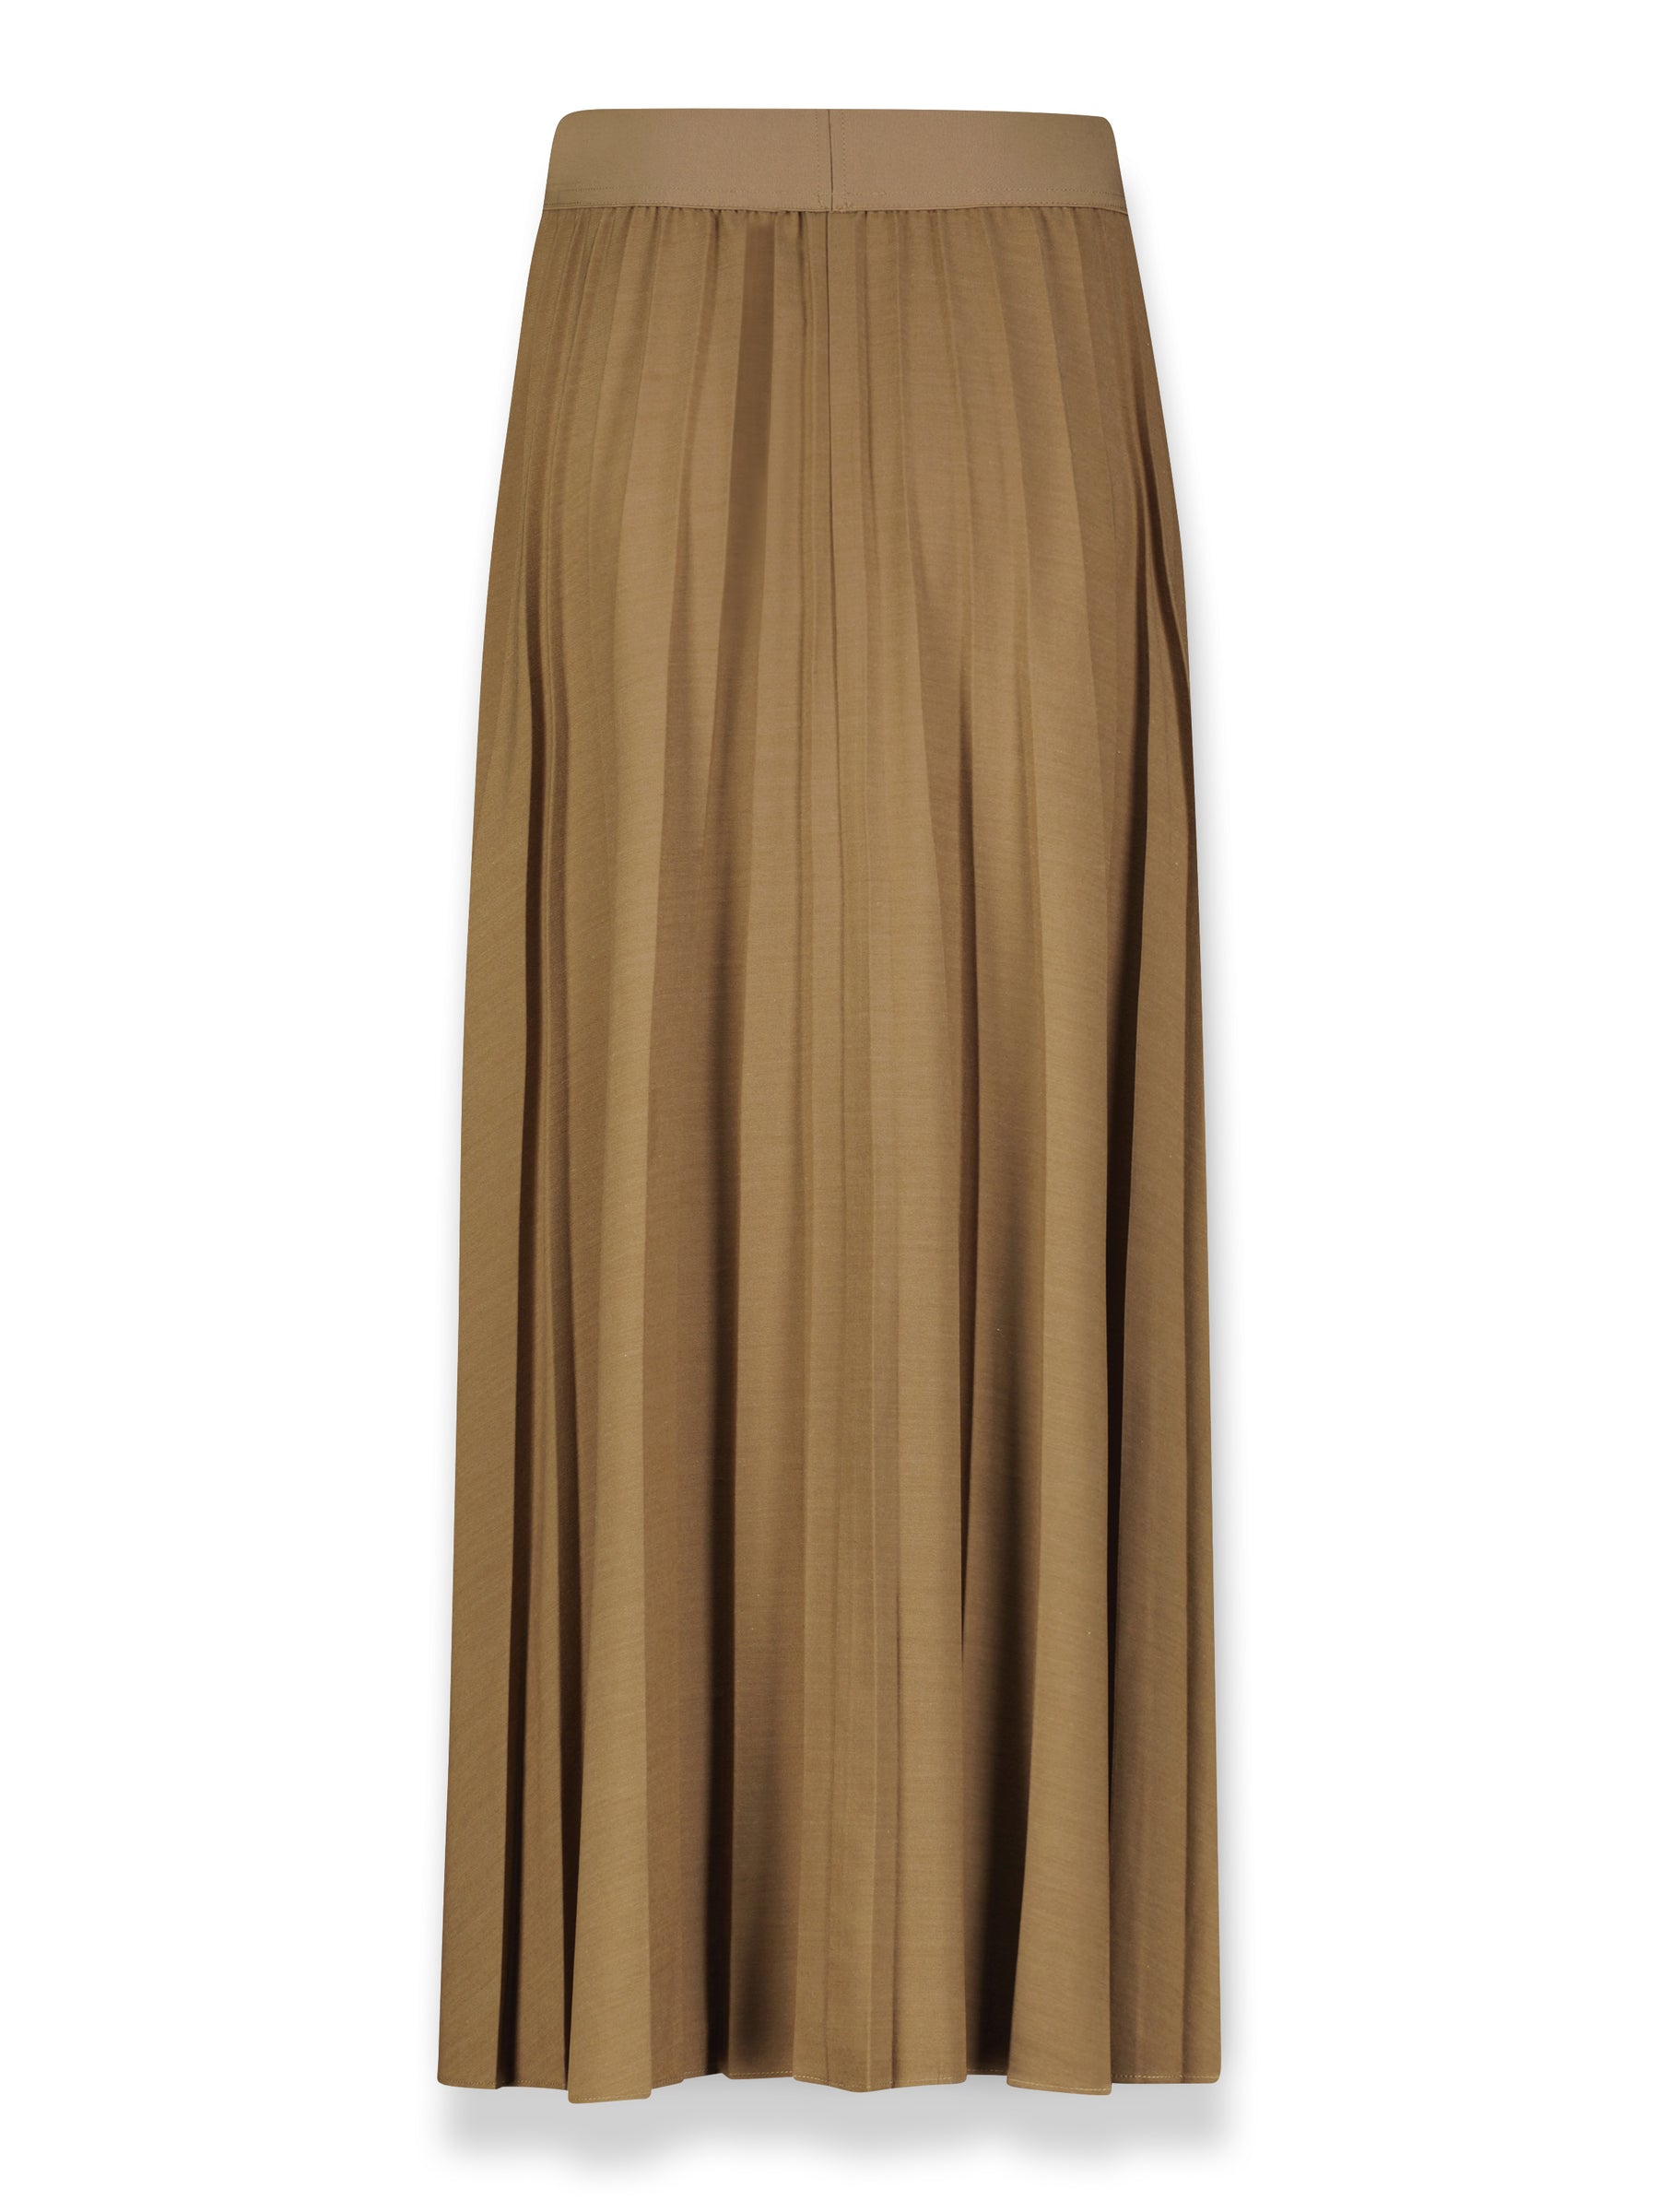 FLAT FRONT PLEATED SKIRT 35"-TAUPE